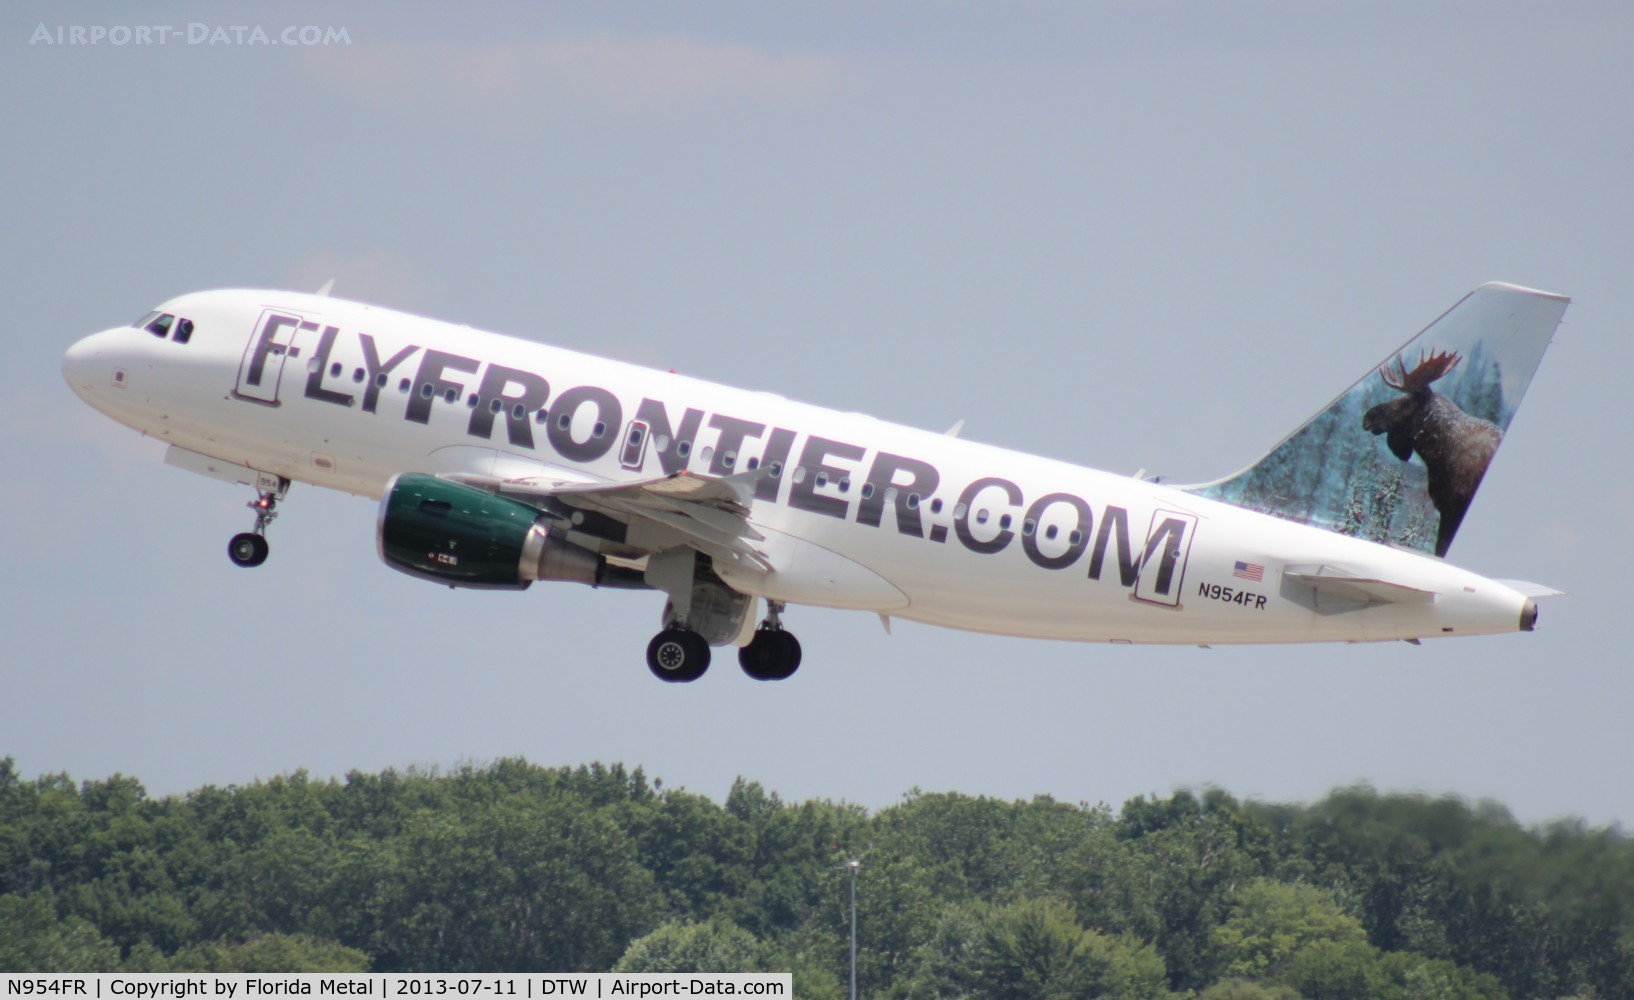 N954FR, 2002 Airbus A319-112 C/N 1786, Frontier Mickey the Moose A319